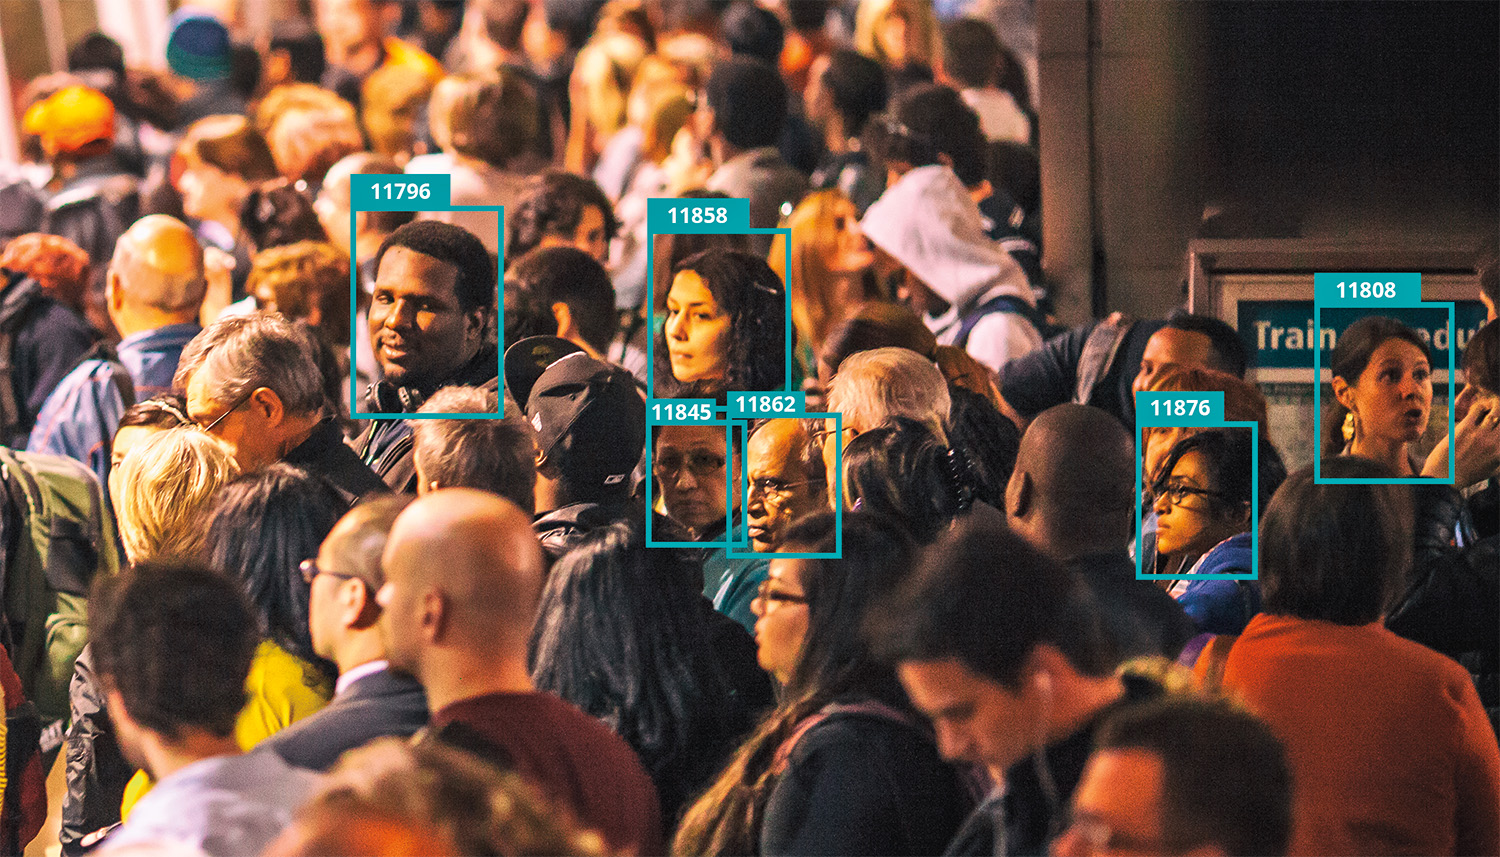 A crowded subway platform shows several commuters turning to face the viewer. Their heads are surrounded by digital boxes that label each an arbitrary number, implying categorization by facial recognition software. The commuters appear to be of various races and ages.